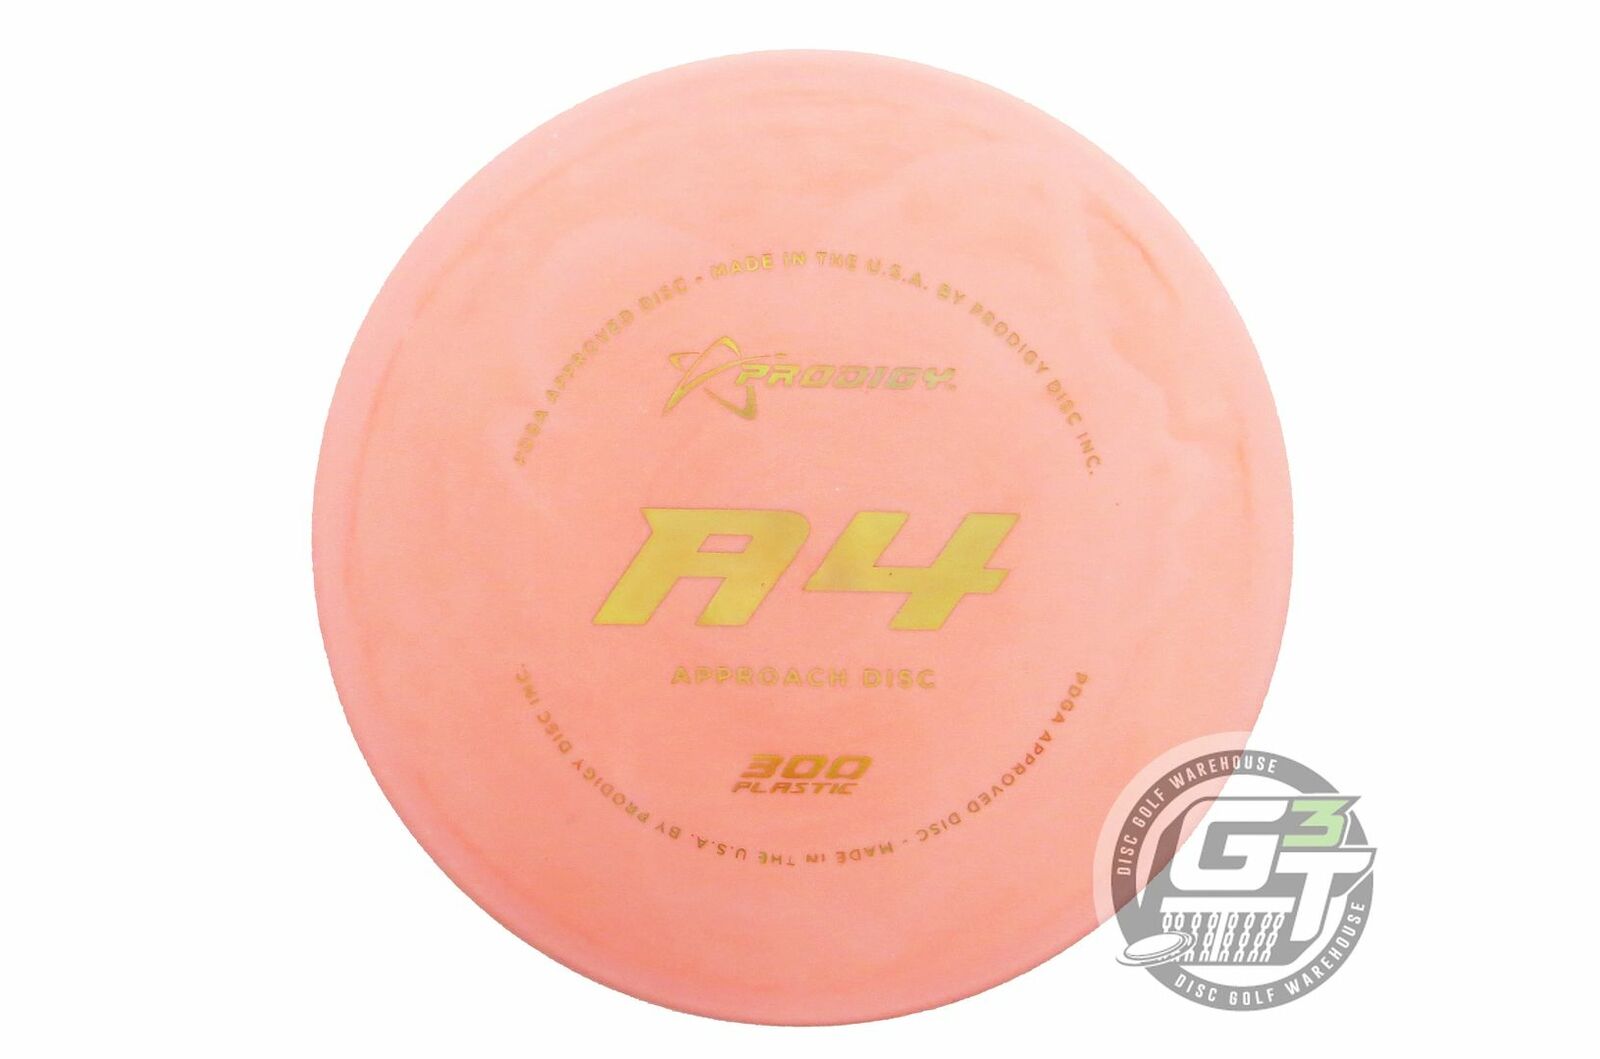 Prodigy 300 Series A4 Approach Midrange Golf Disc (Individually Listed)